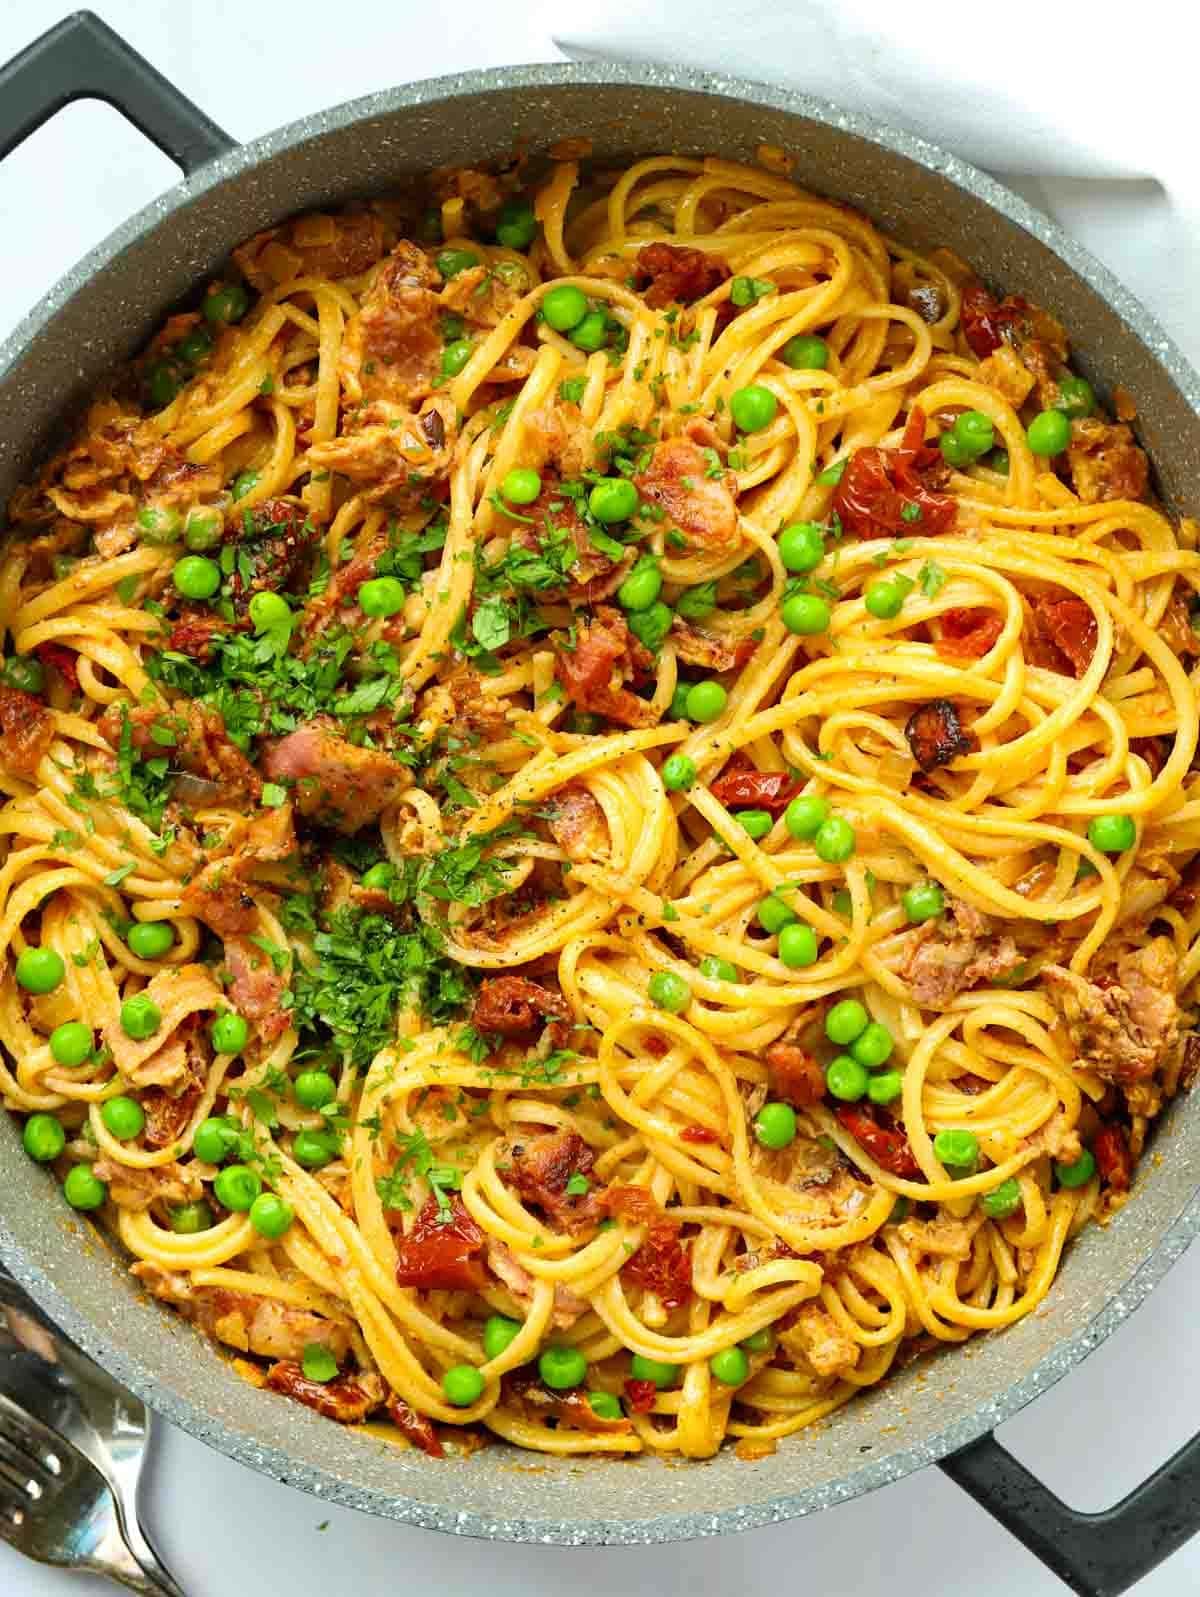 A big pan filled with spaghetti and bacon with peas for the recipe Creamy Bacon Pasta.